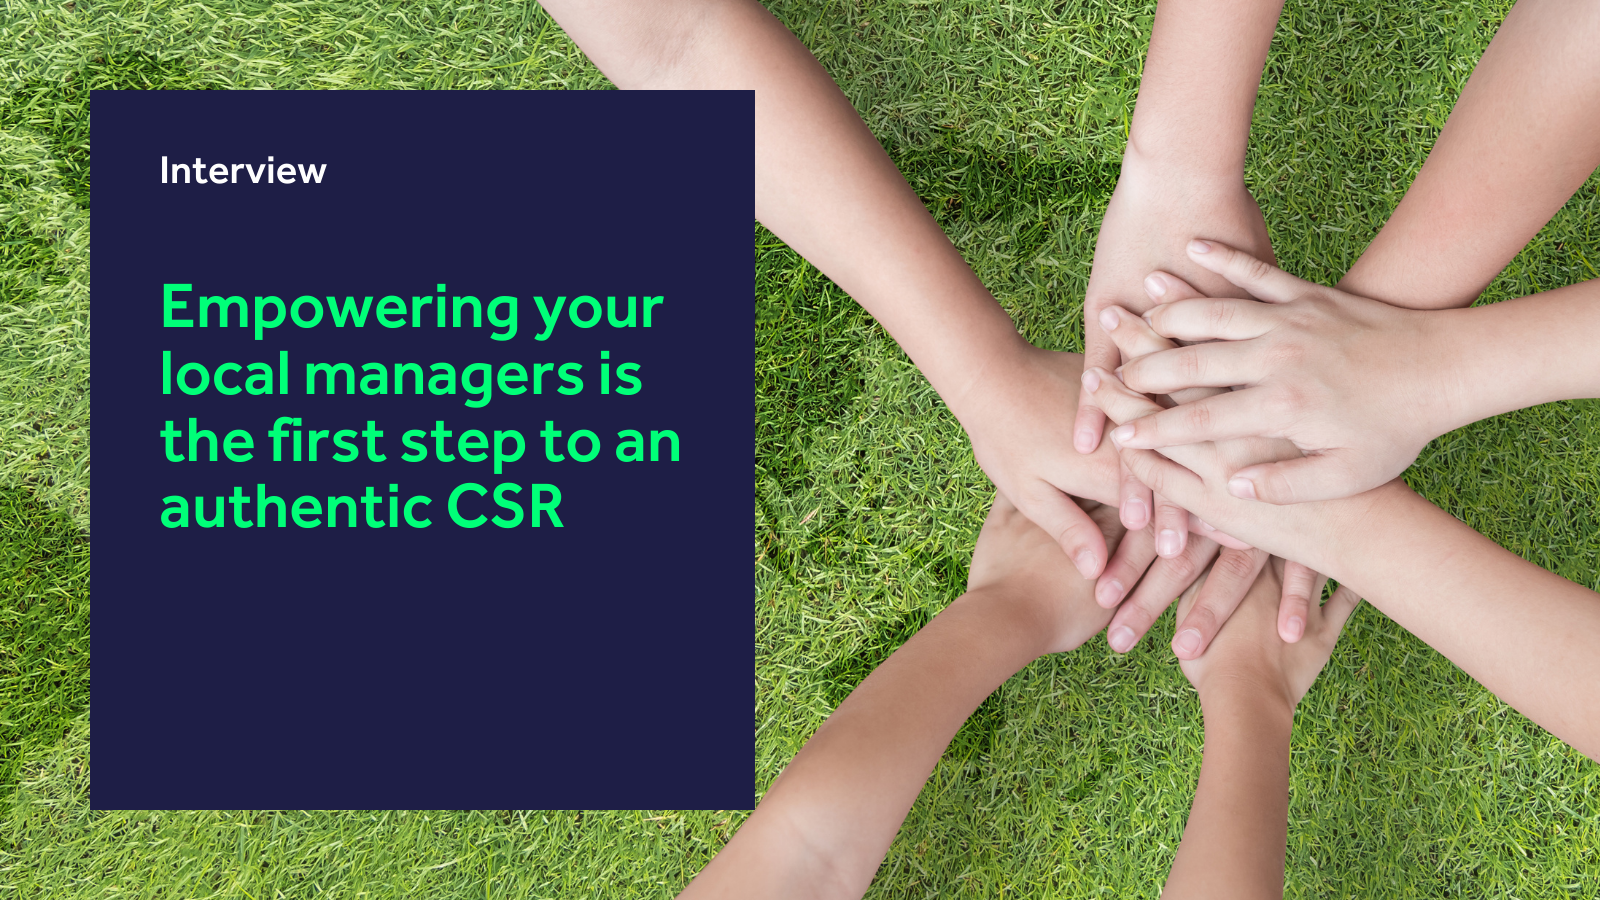 Empowering your local managers is the first step to an authentic CSR